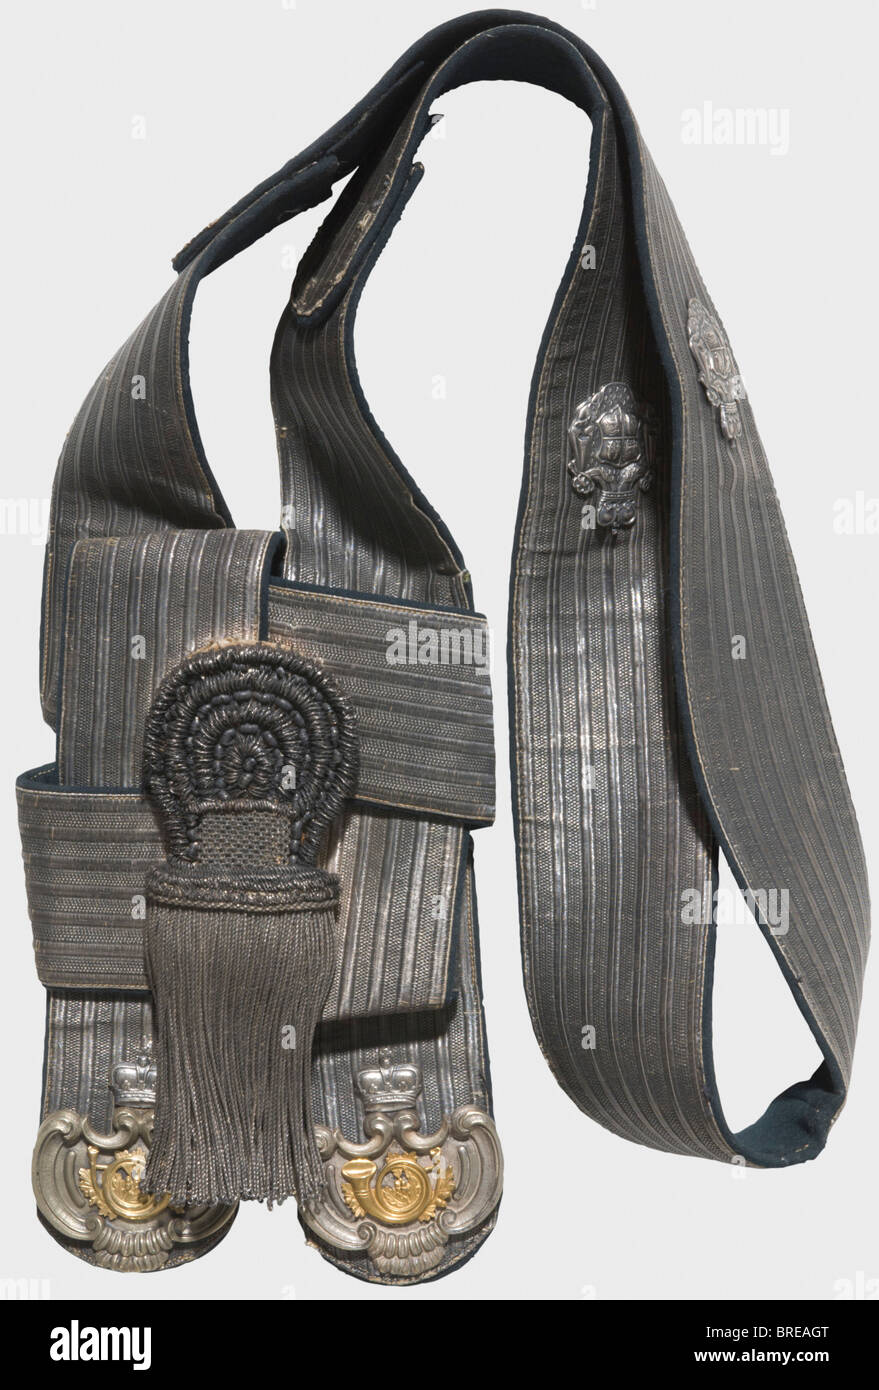 Two hunting bandoliers, Hessian and Count Stollberg-Wernigerode, 19th century, respectively Both velvet-backed bandoliers have lightly darkened lace appliqué on the front, silver mountings, and bullion tassels. One piece displays the two coat of arms of the Counts of Stollberg-Wernigerode. The second applied with an 'L' beneath a crown between stag heads. Length of each ca. 88 cm. historic, historical, 19th century, hunt, hunts, hunting, utensil, piece of equipment, utensils, trophies, object, objects, stills, clipping, clippings, cut out, cut-out, cut-outs, Stock Photo